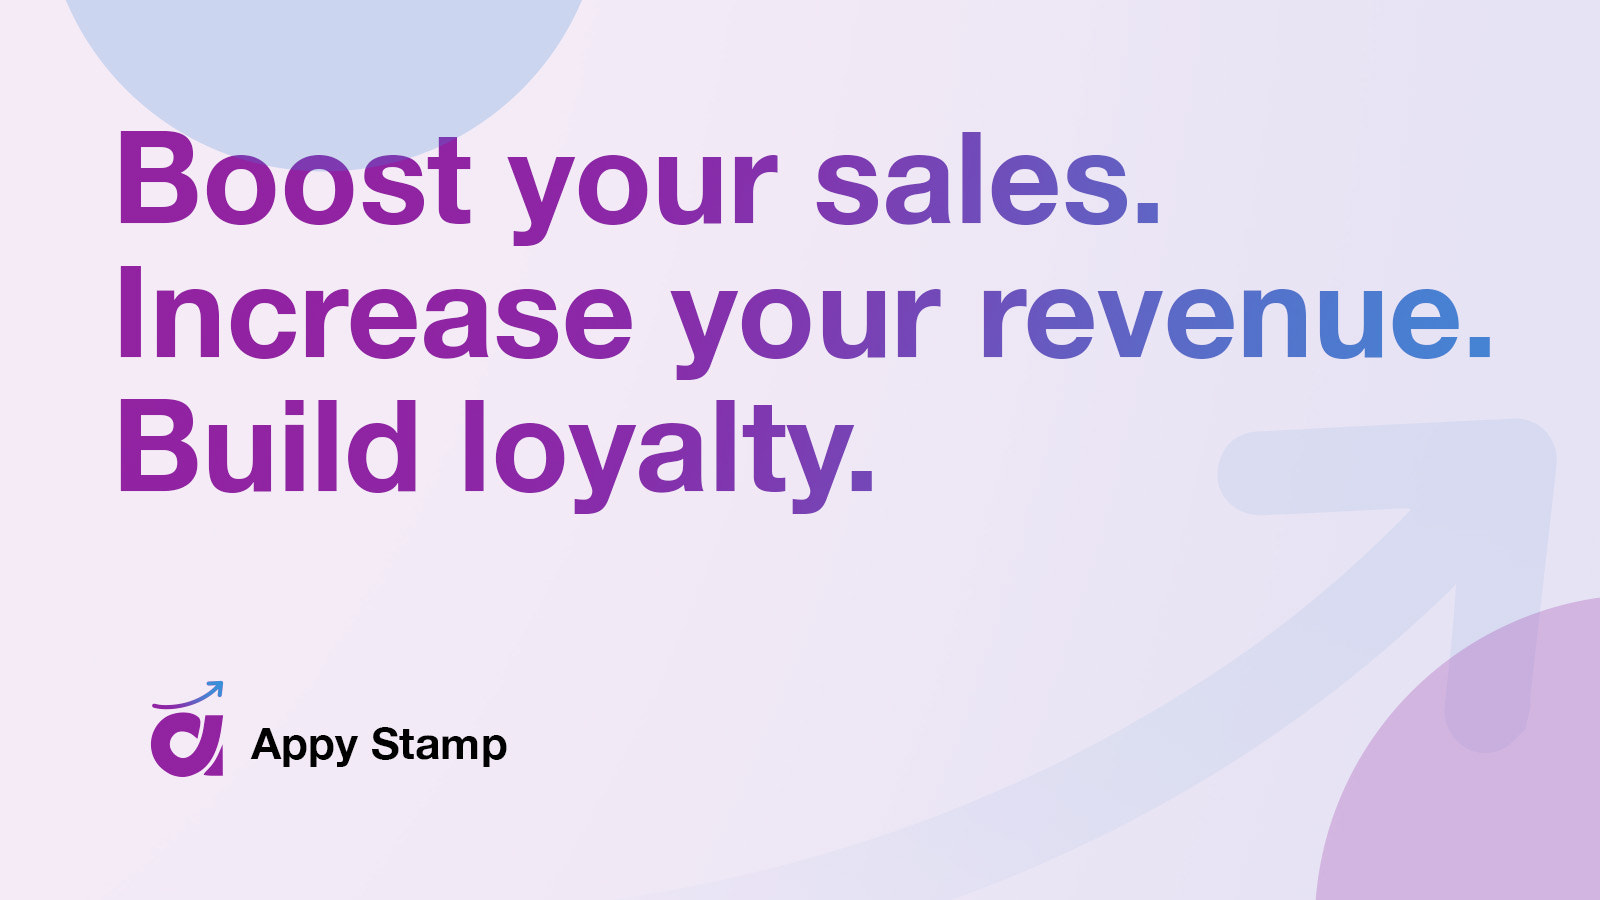 Boost sales, increase revenue and build loyalty